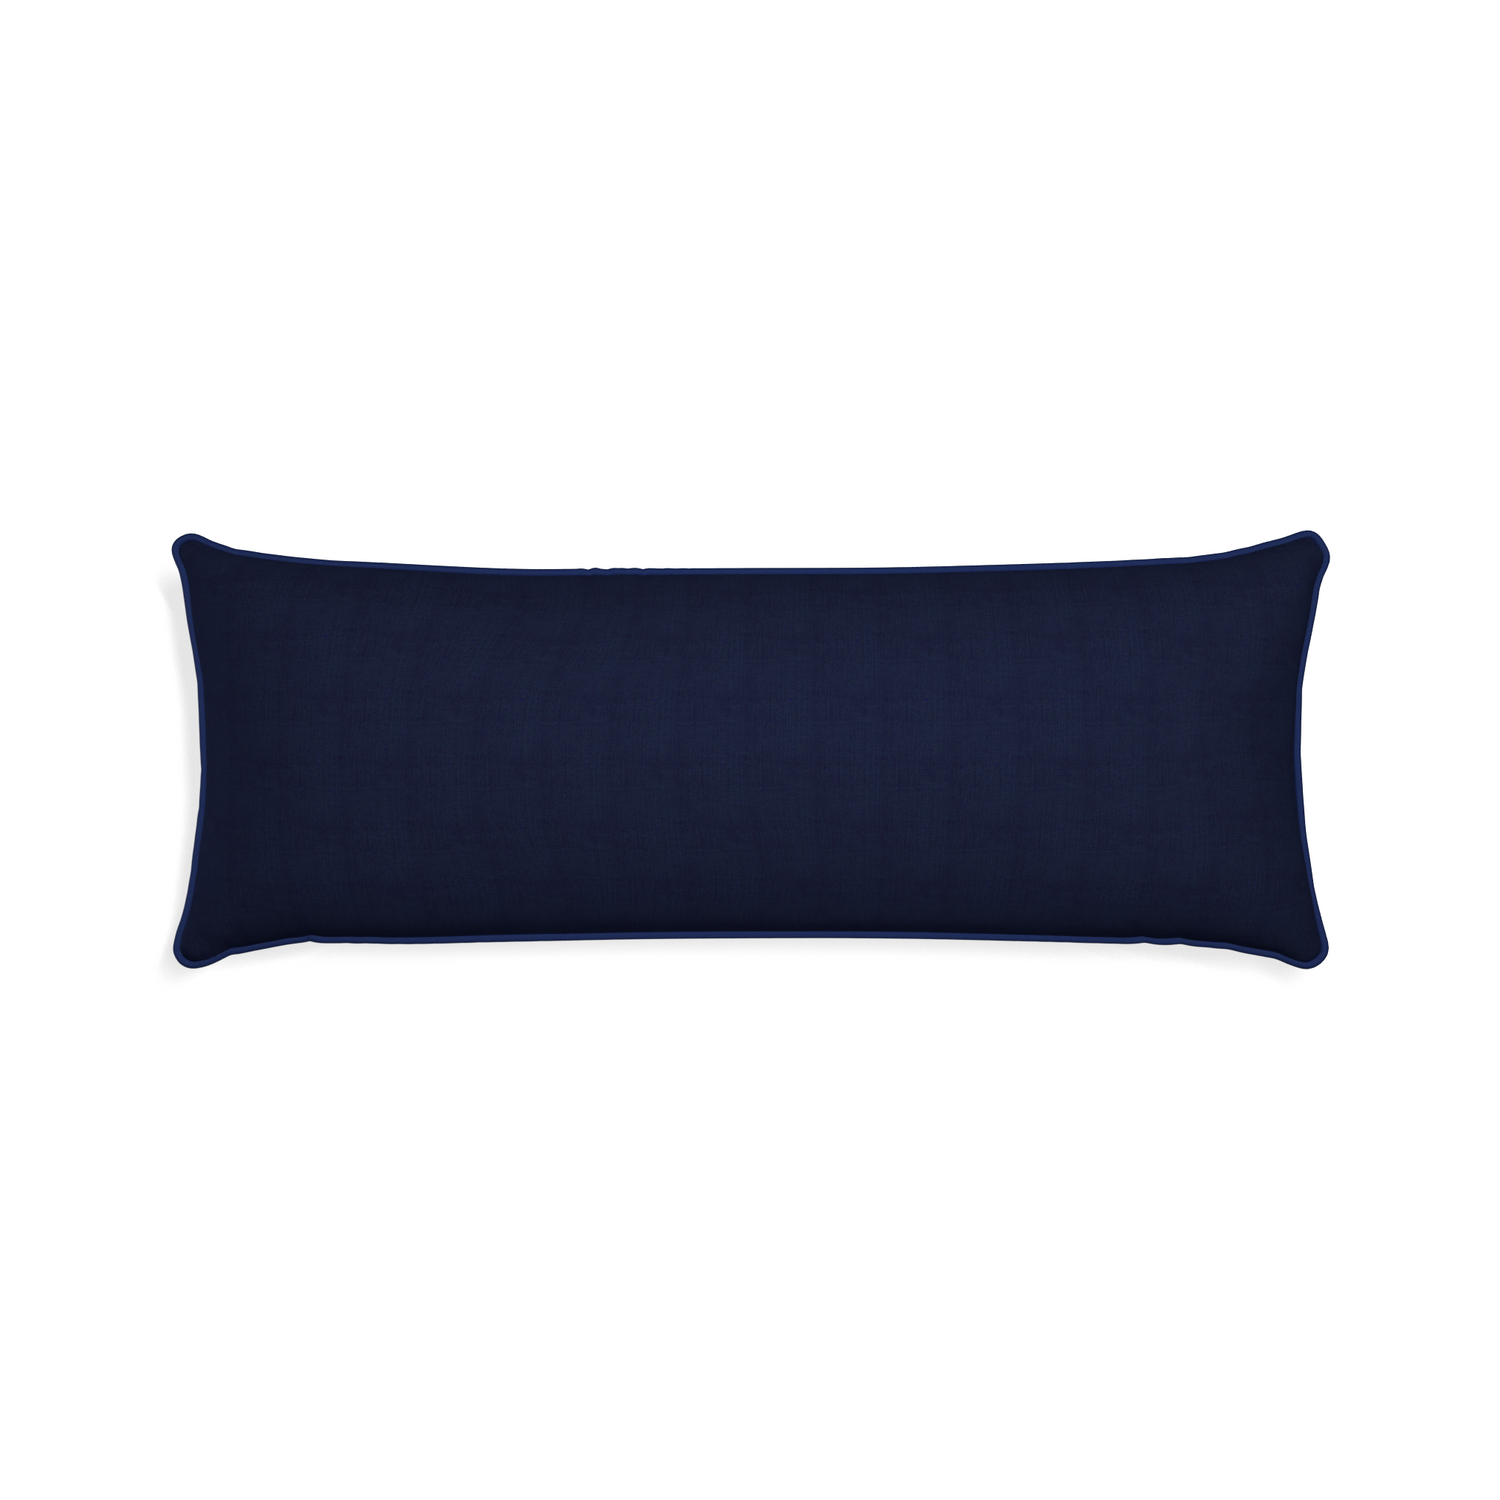 Xl-lumbar midnight custom pillow with midnight piping on white background